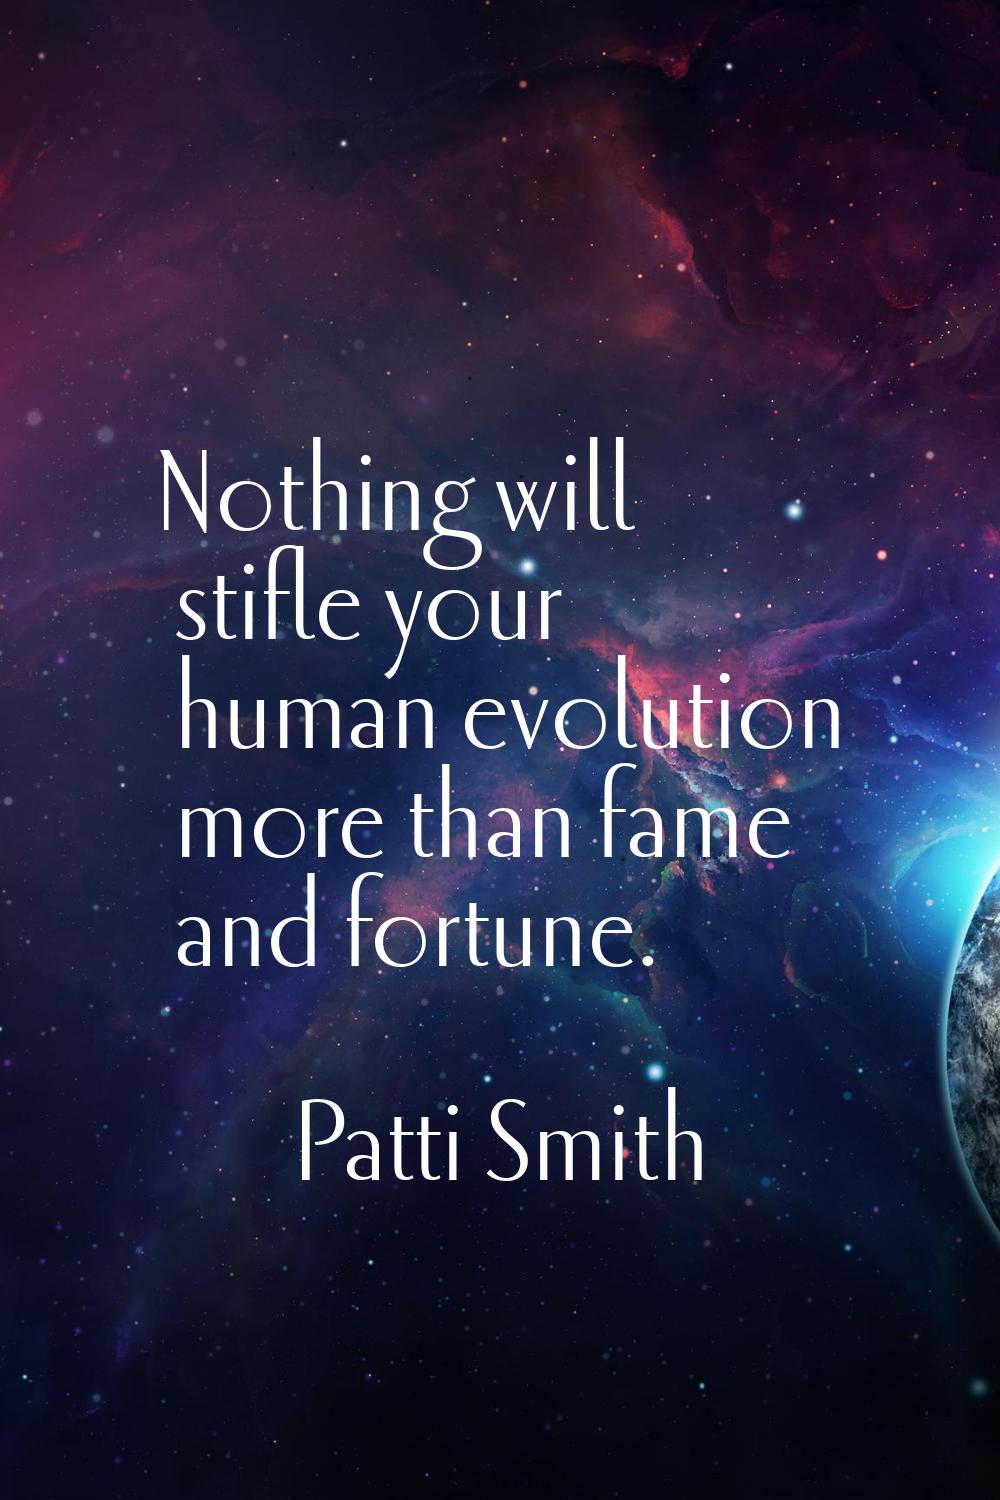 Nothing will stifle your human evolution more than fame and fortune.